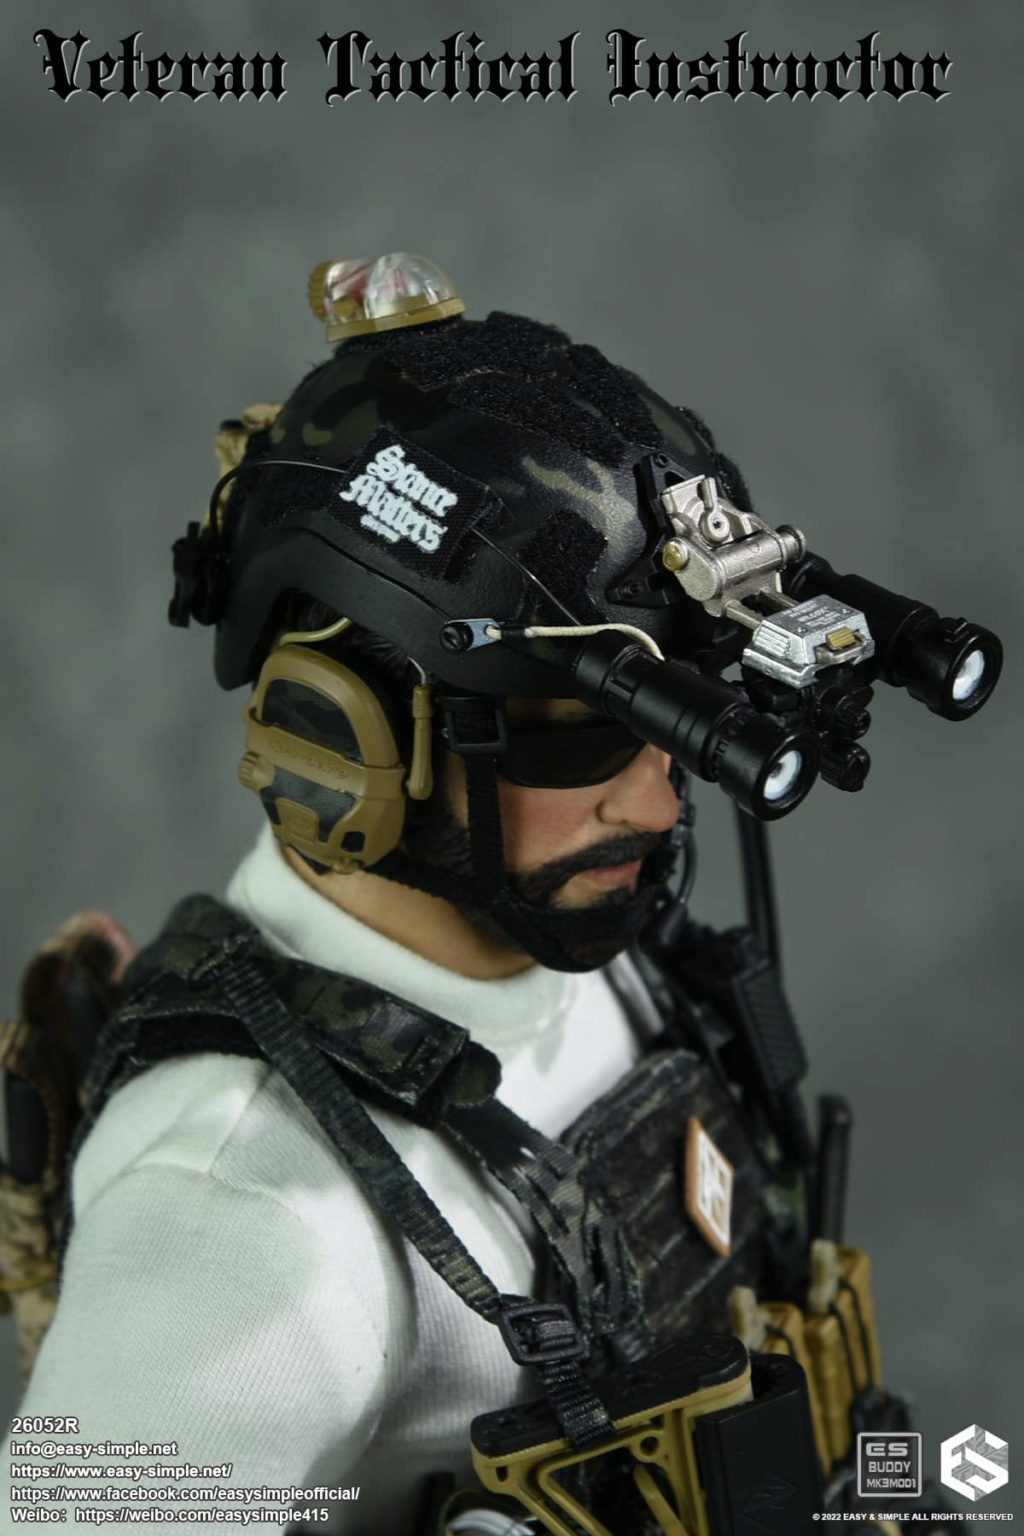 easy - NEW PRODUCT: Easy&Simple: 26052R 1/6 Scale Veteran Tactical Instructor 31159510